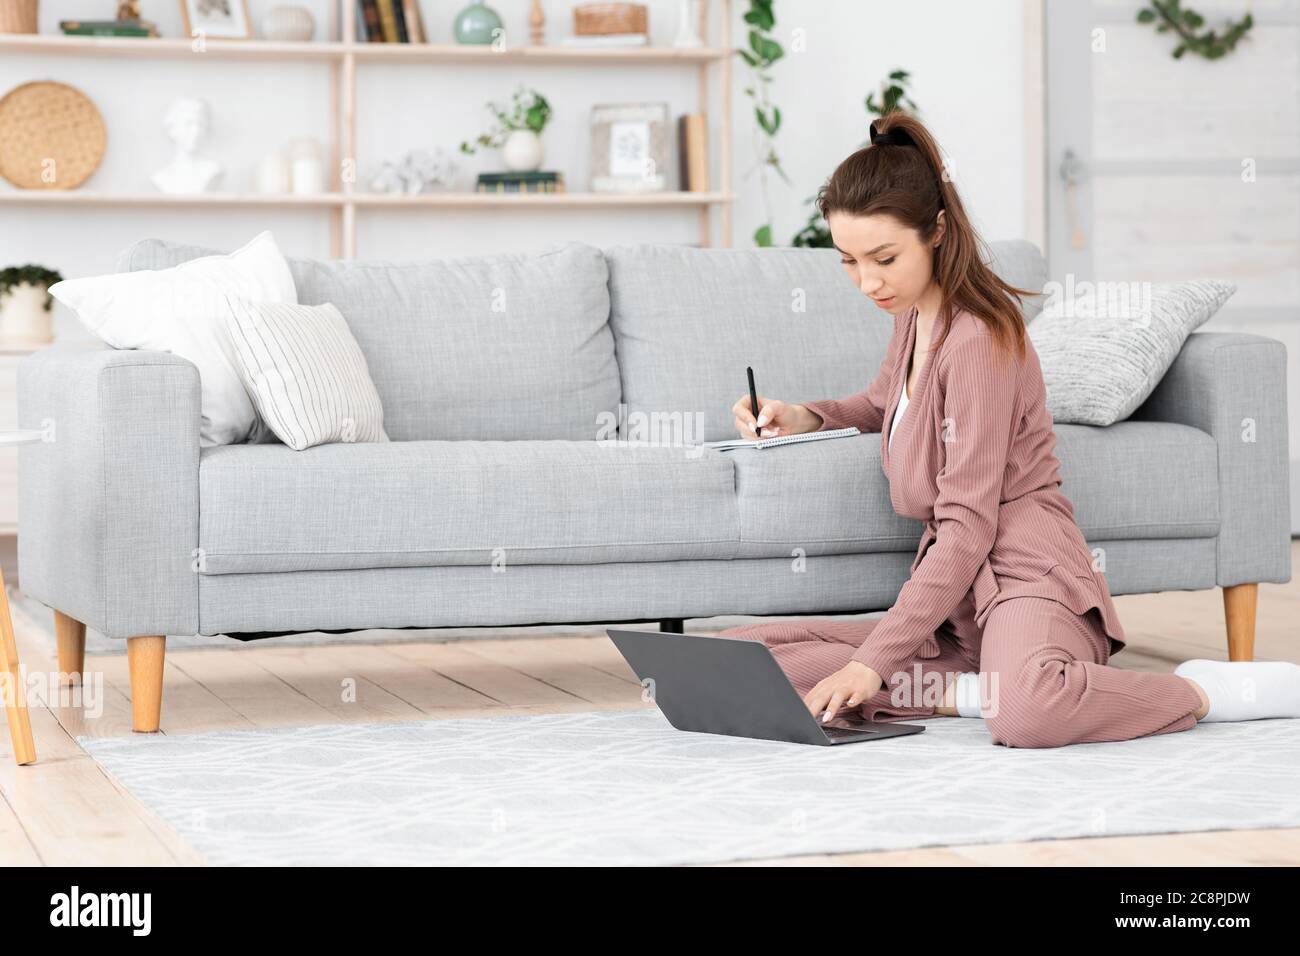 Recruitment Concept. Young Woman Searching Job Online, Browsing Work Opportunities On Laptop Stock Photo